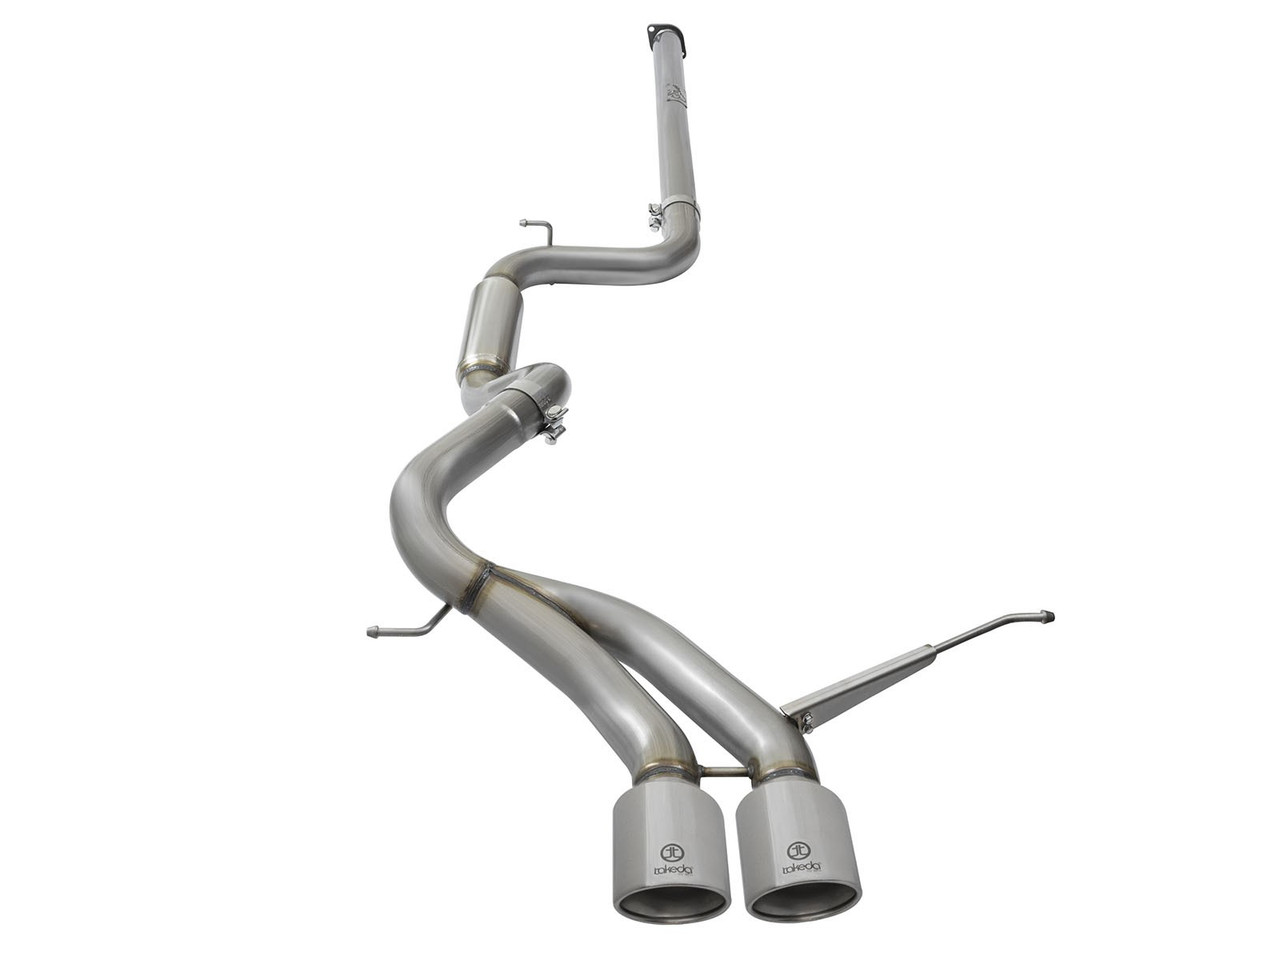 Takeda 3 IN 304 Stainless Steel Cat-Back Exhaust System w/Polished Tip
Exit Style: Straight